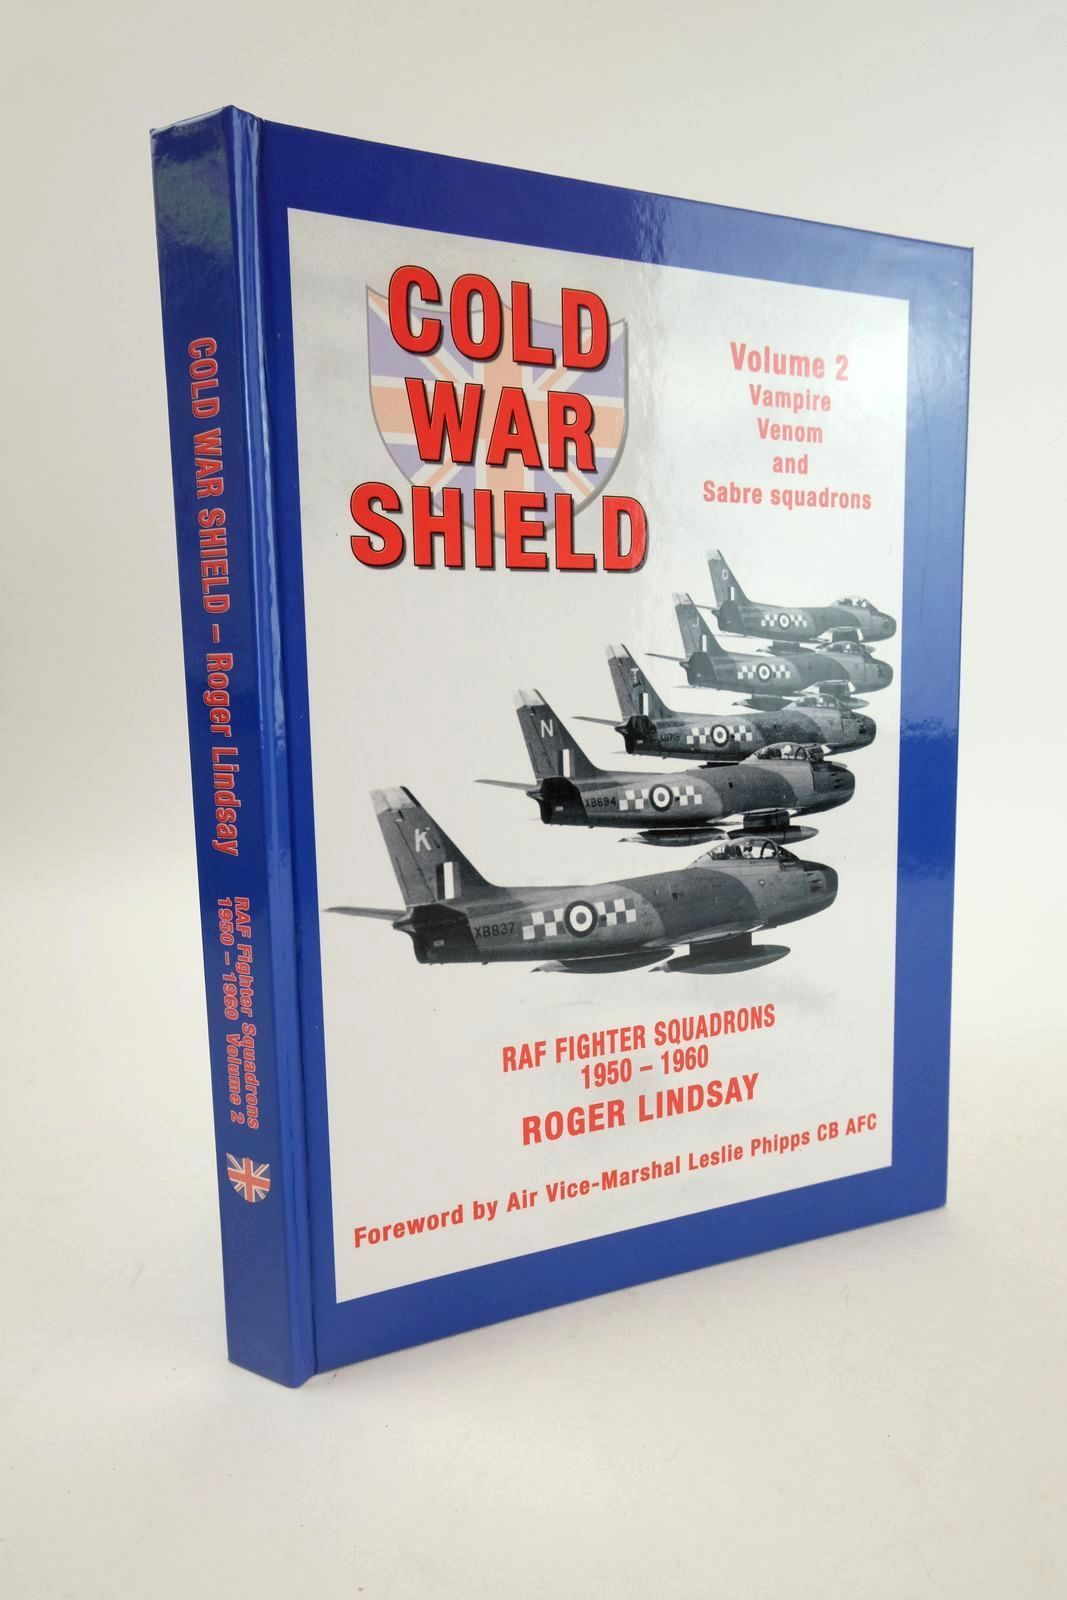 Photo of COLD WAR SHIELD - RAF FIGHTER SQUADRONS 1950-1960 - VOLUME 2 written by Lindsay, Roger published by Roger Lindsay (STOCK CODE: 1325205)  for sale by Stella & Rose's Books